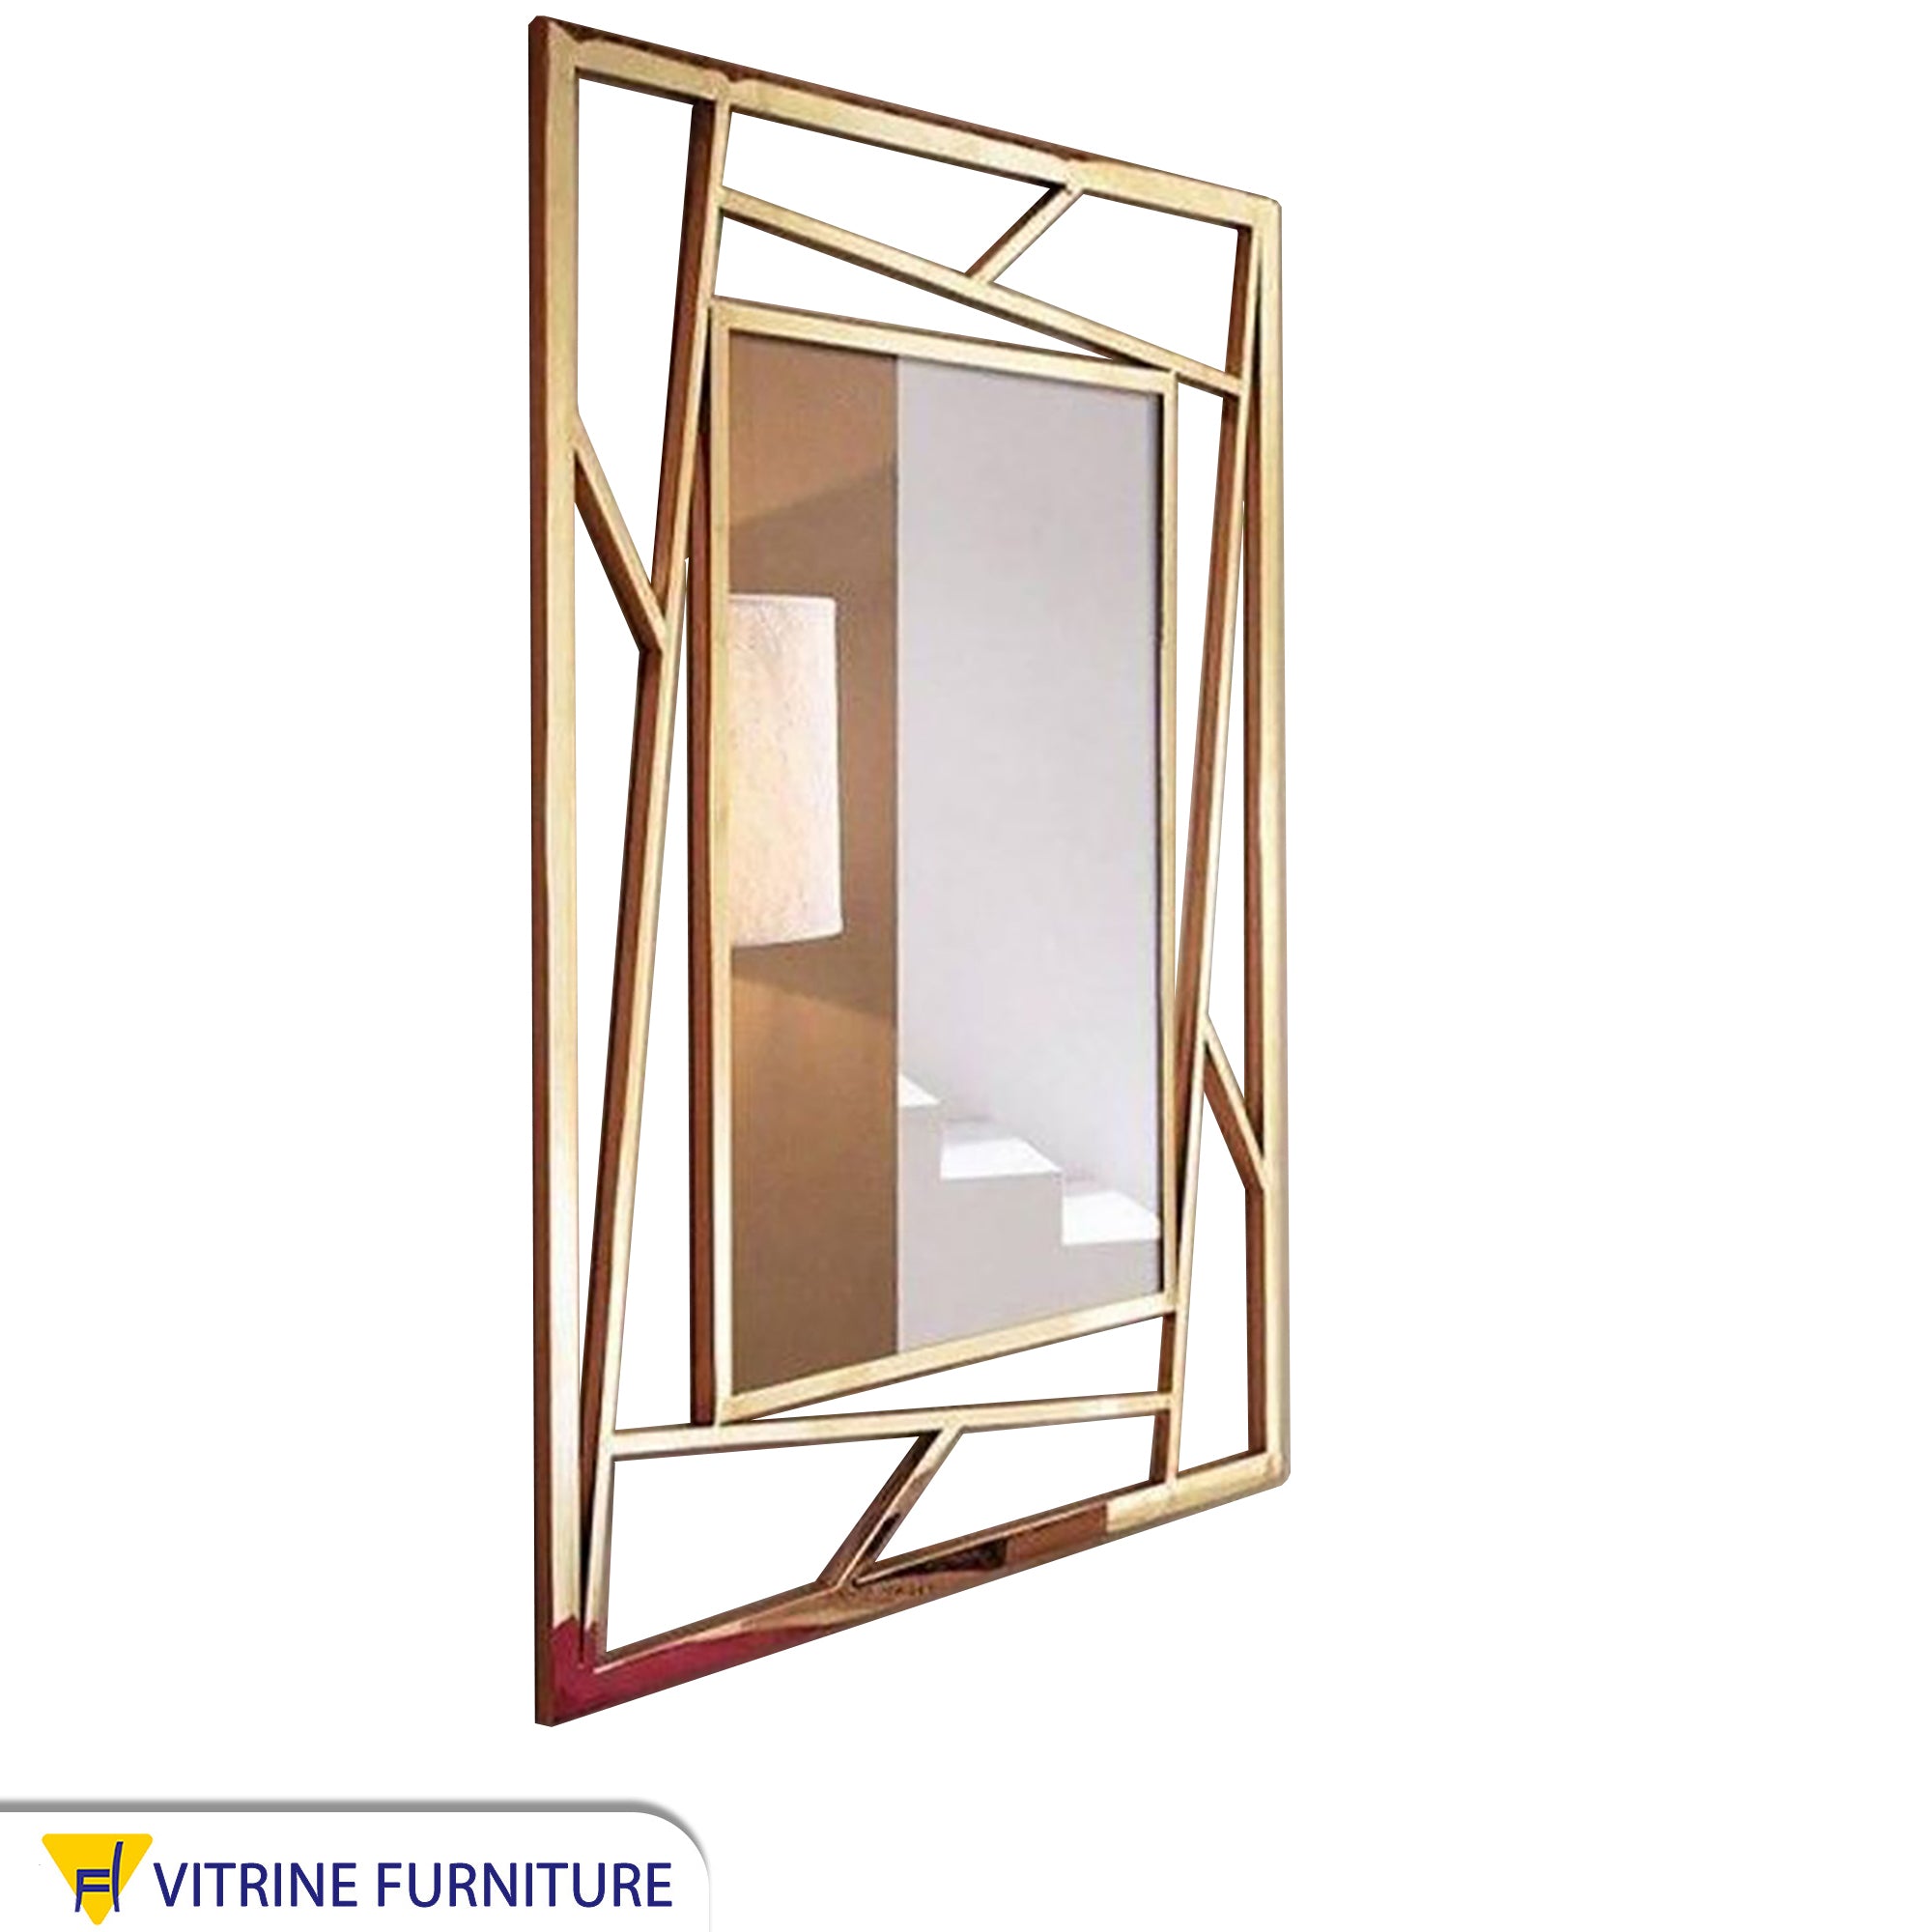 Rectangular mirror with a wide decorative frame